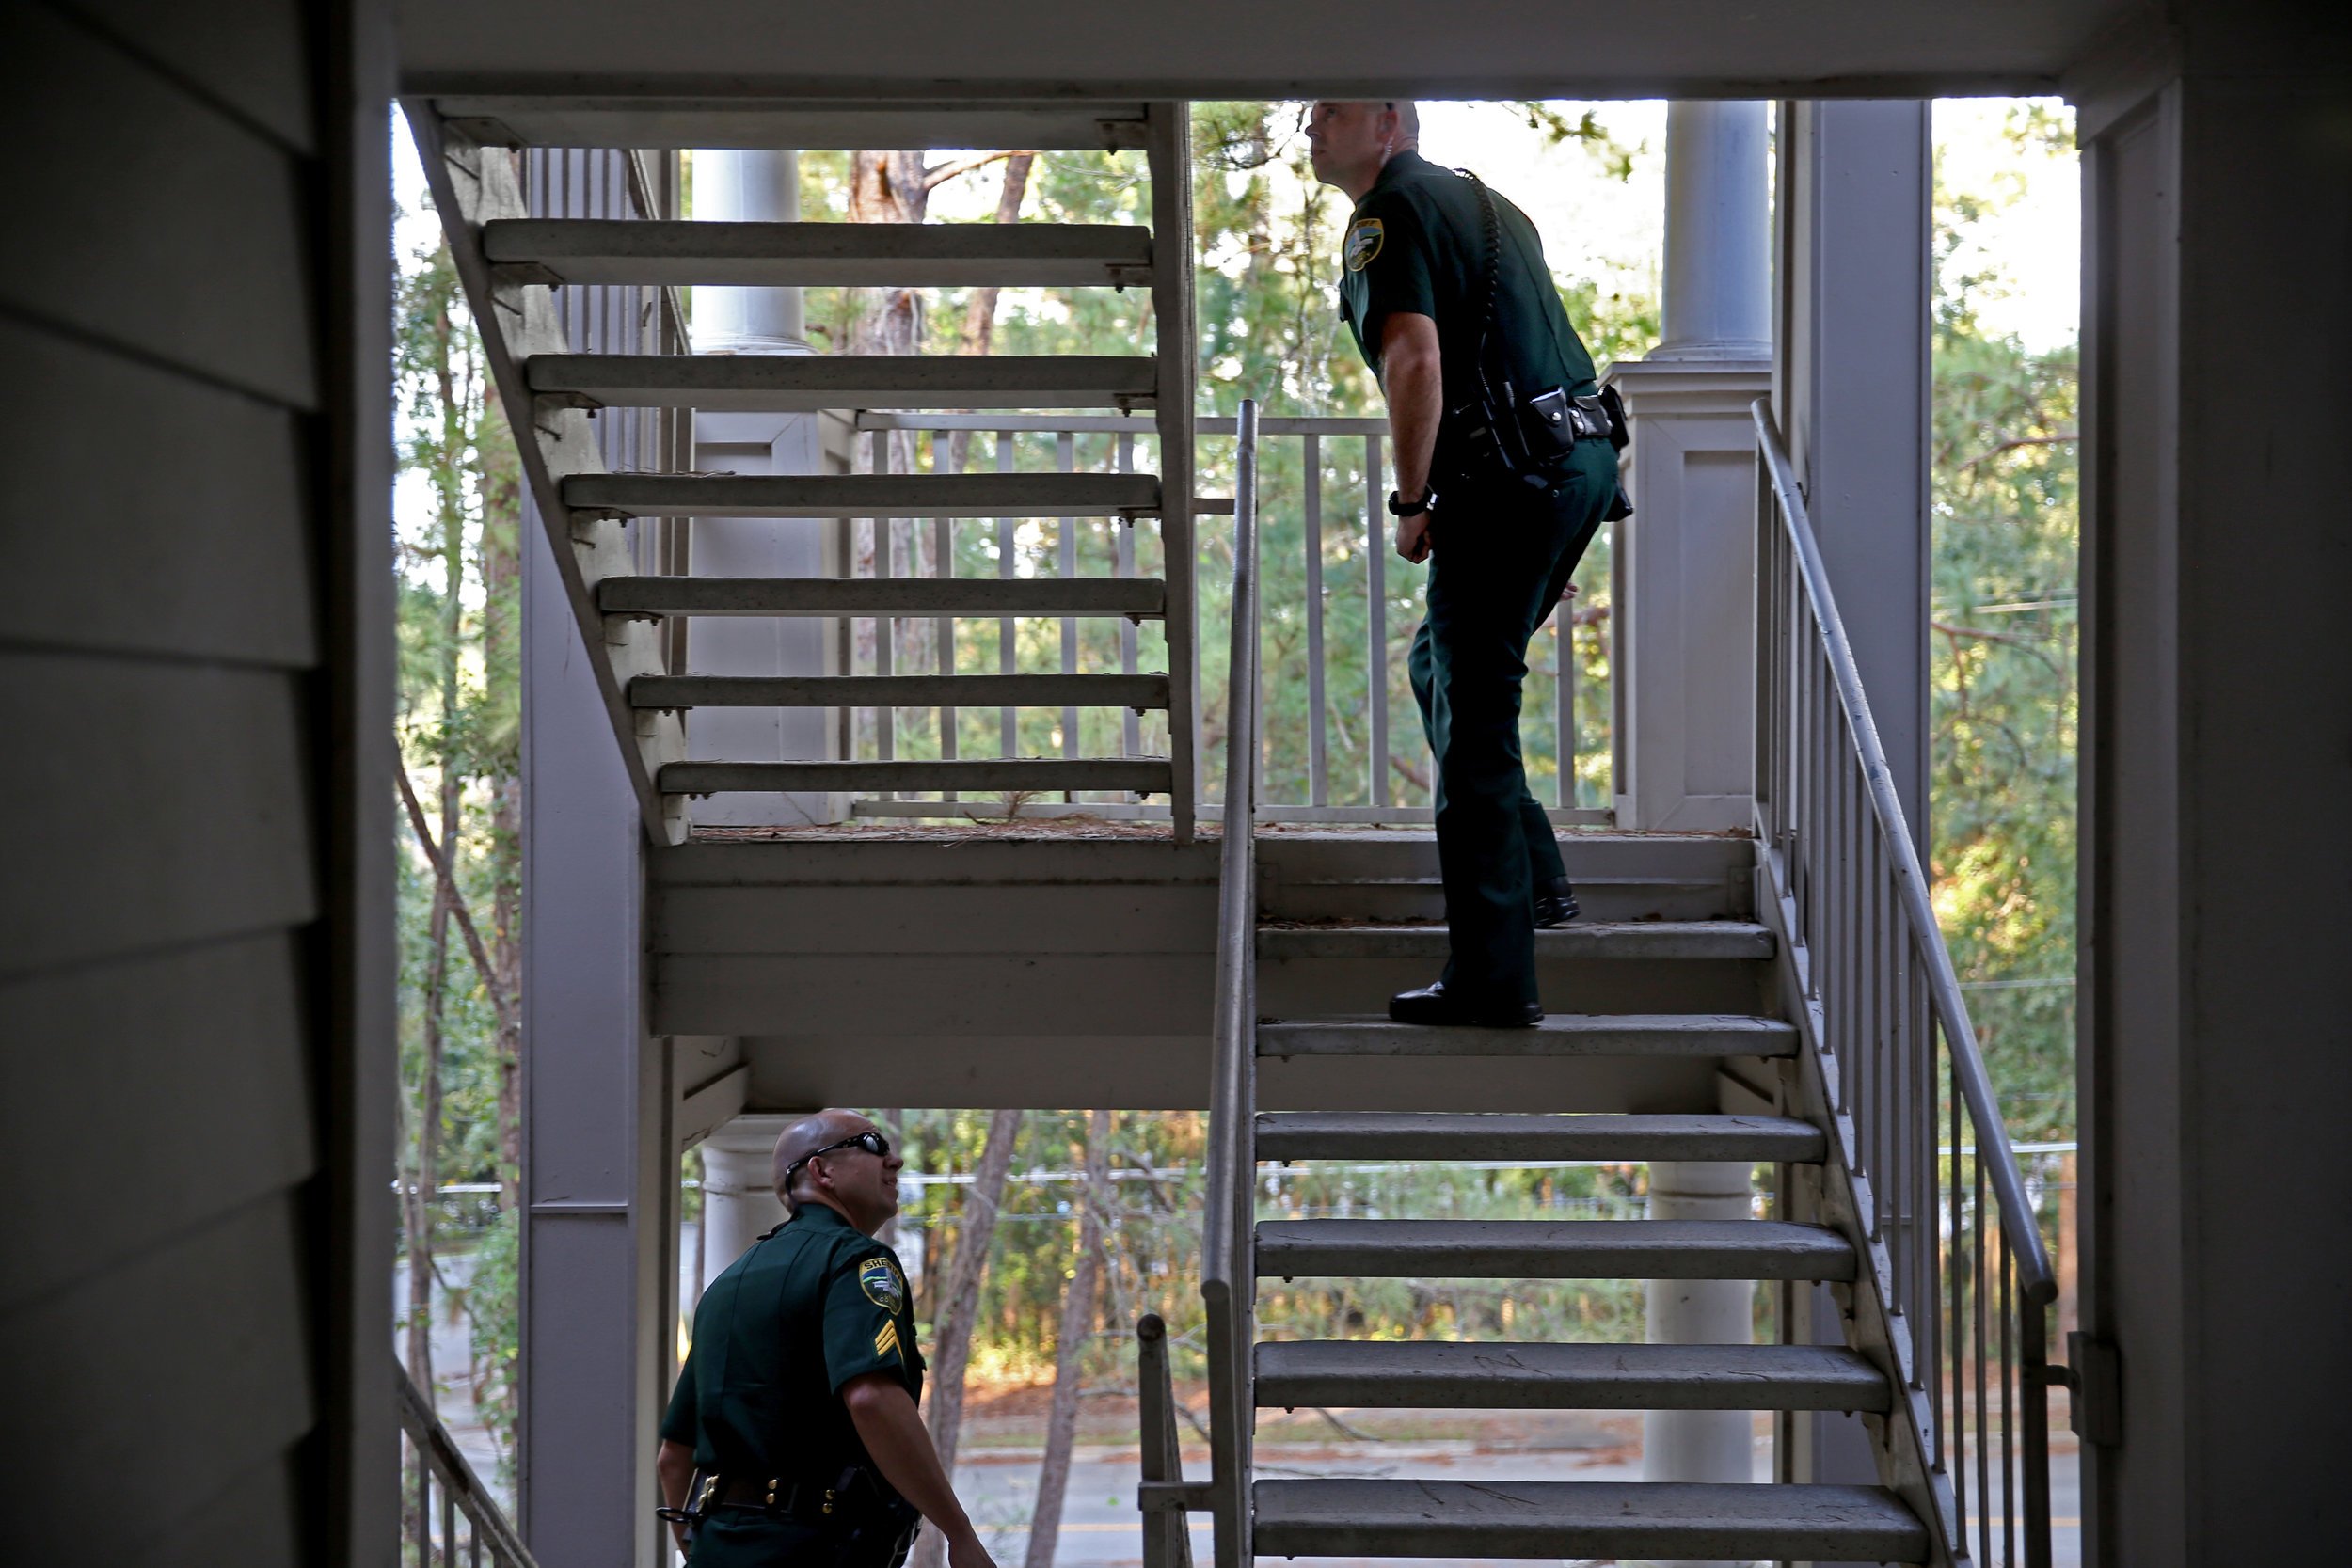  Leon County Sheriff's Office Sgt. Chris Poole, left, and Deputy John Baas search an apartment complex for a man with outstanding warrants Oct. 10, 2017. 